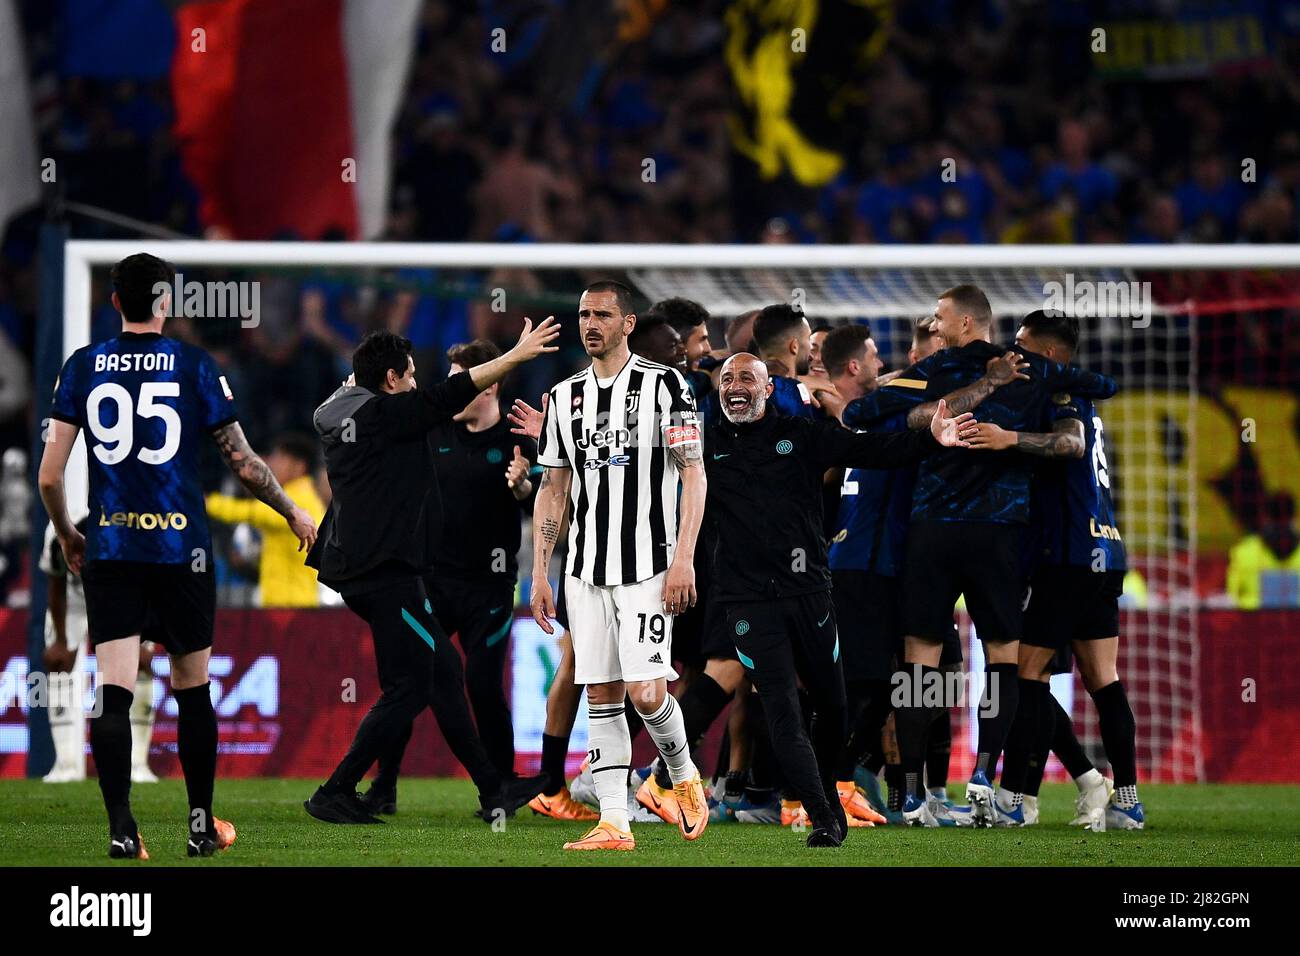 Rome, Italy. 11 May 2022. Leonardo Bonucci of Juventus FC looks dejected as players of FC Internazionale cleebrate the victory at the end of the Coppa Italia final football match between Juventus FC and FC Internazionale. Credit: Nicolò Campo/Alamy Live News Stock Photo